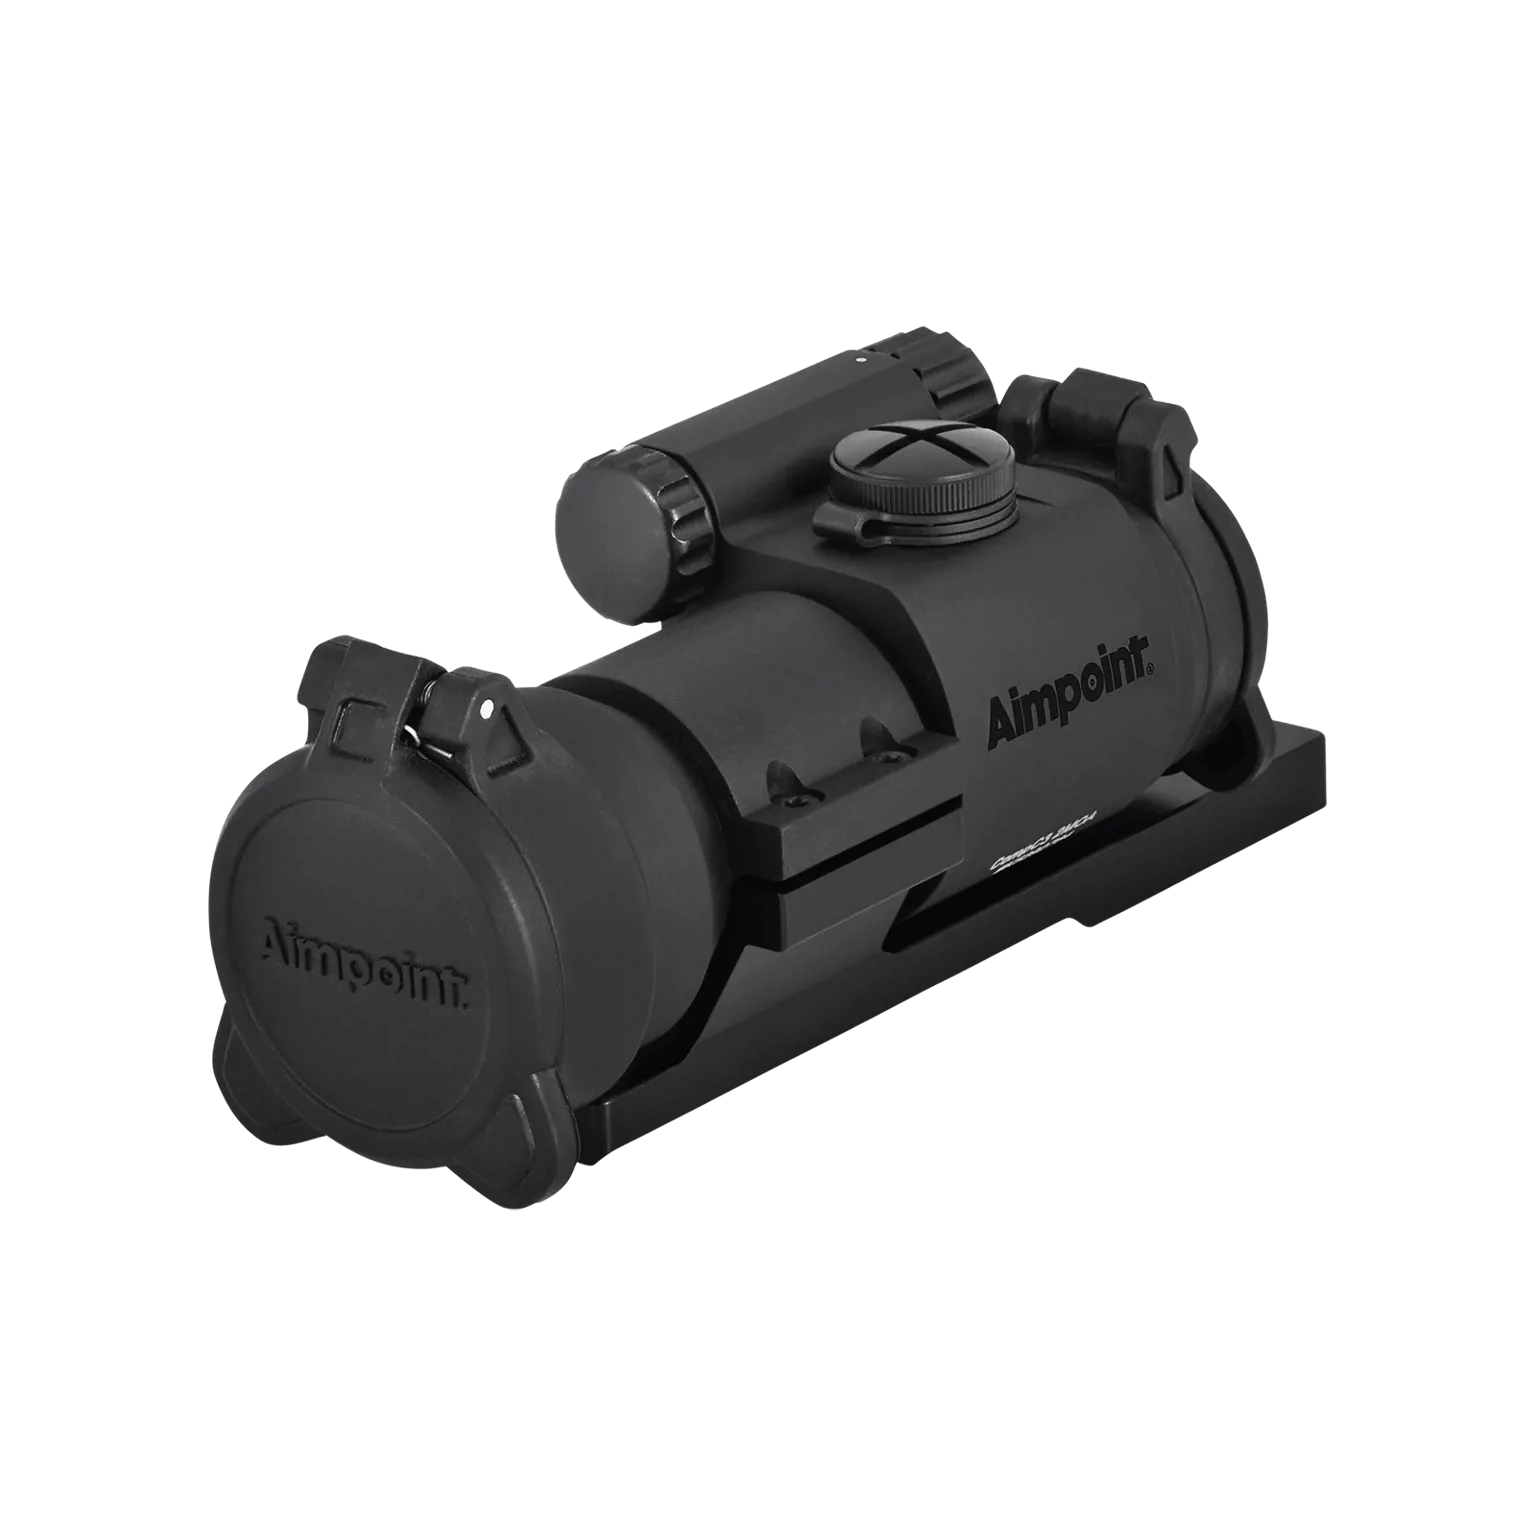 CompC3™ 2 MOA - Red dot reflex sight with mount for semi-automatic rifles - 5